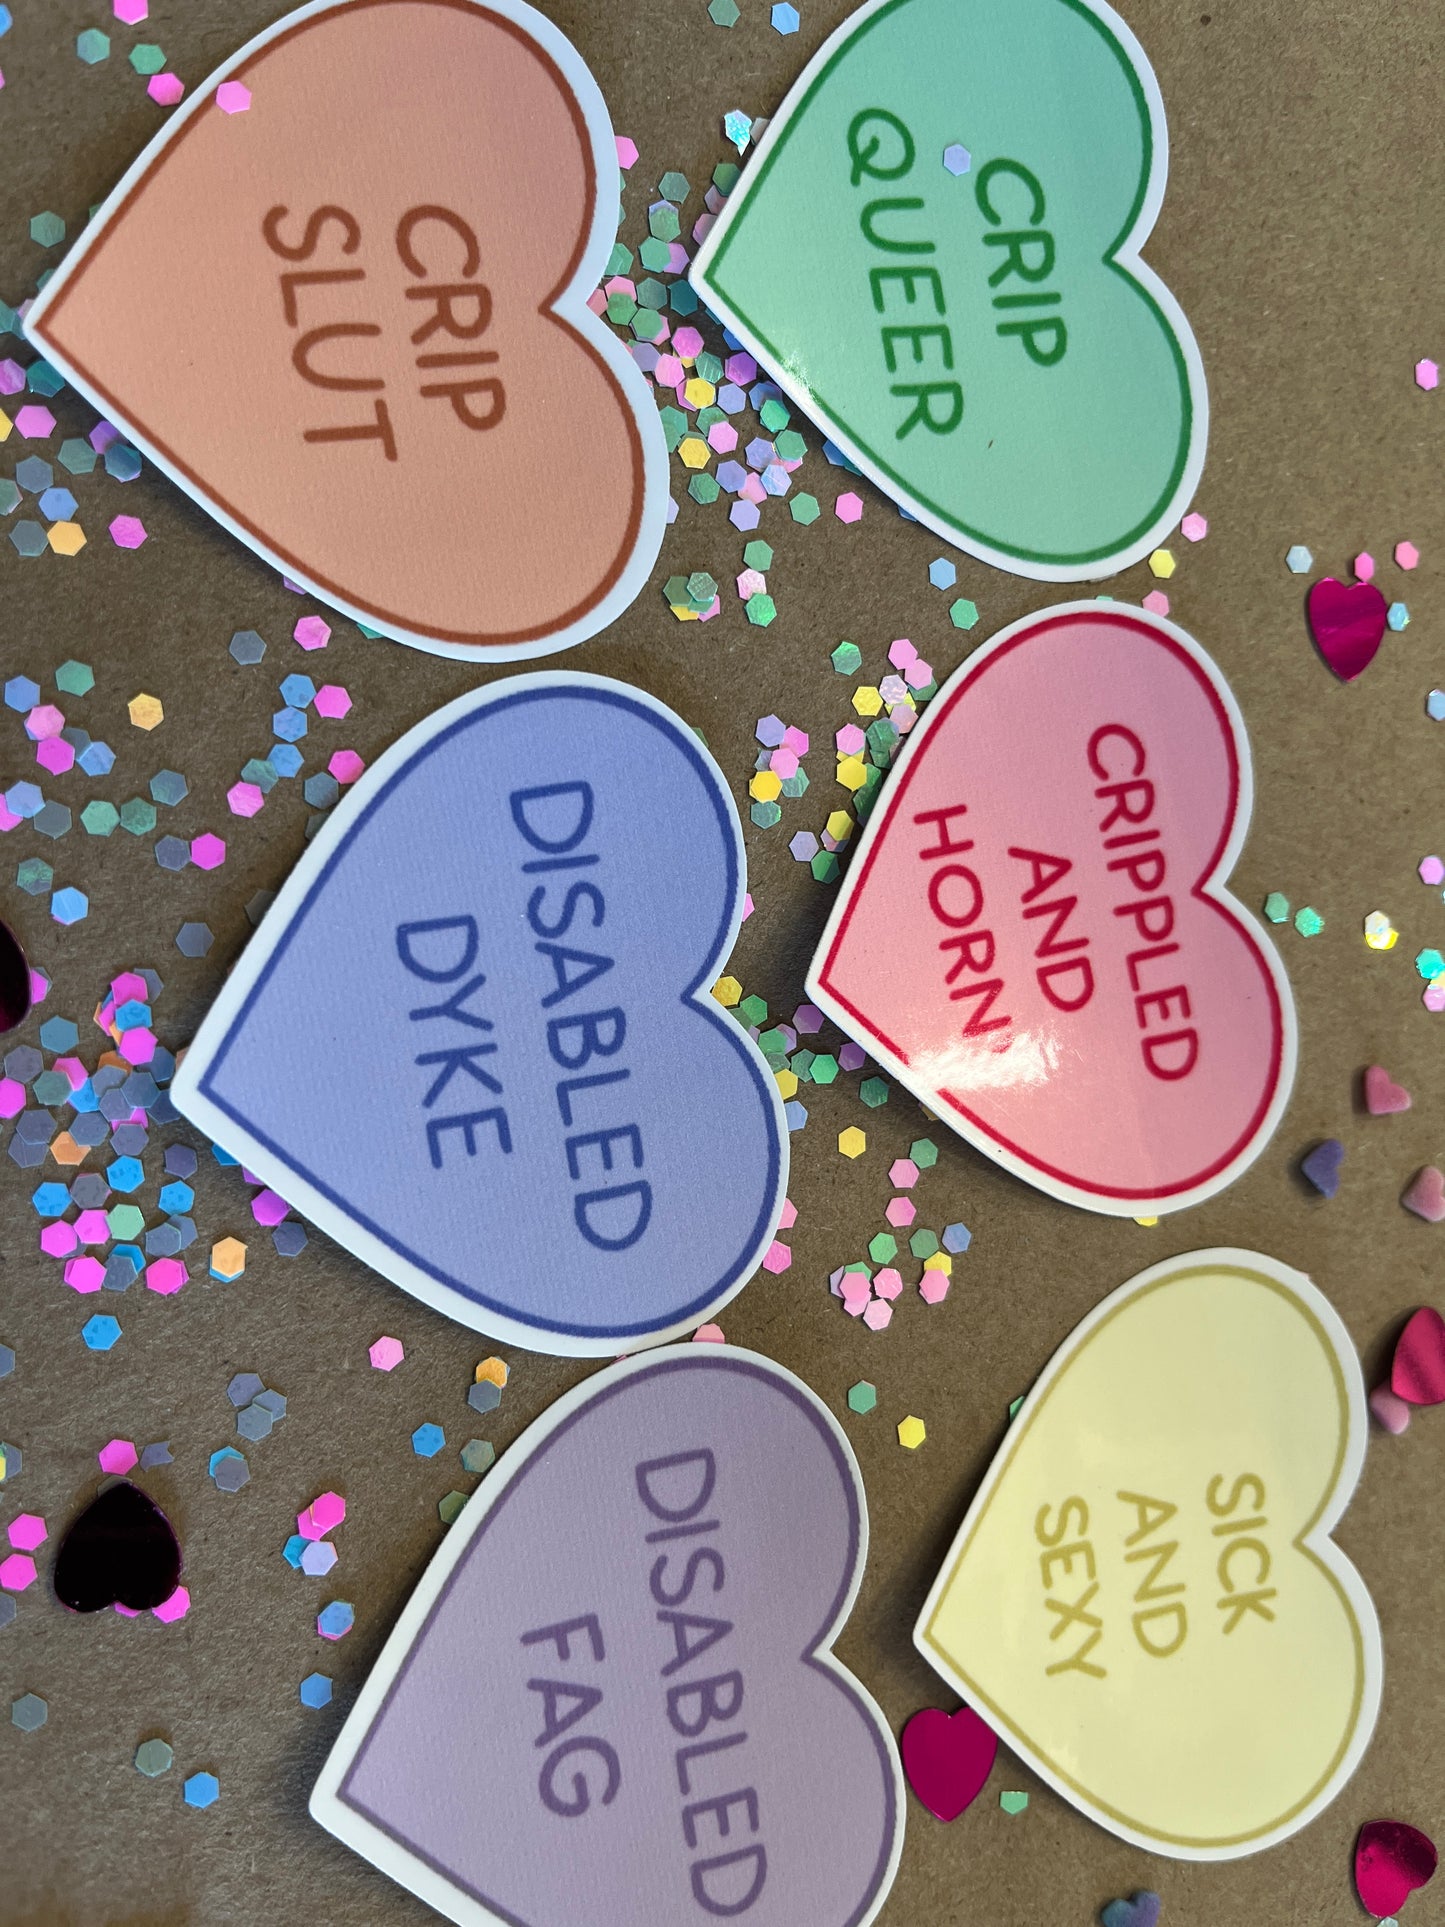 Disability & Sexuality Heart Stickers